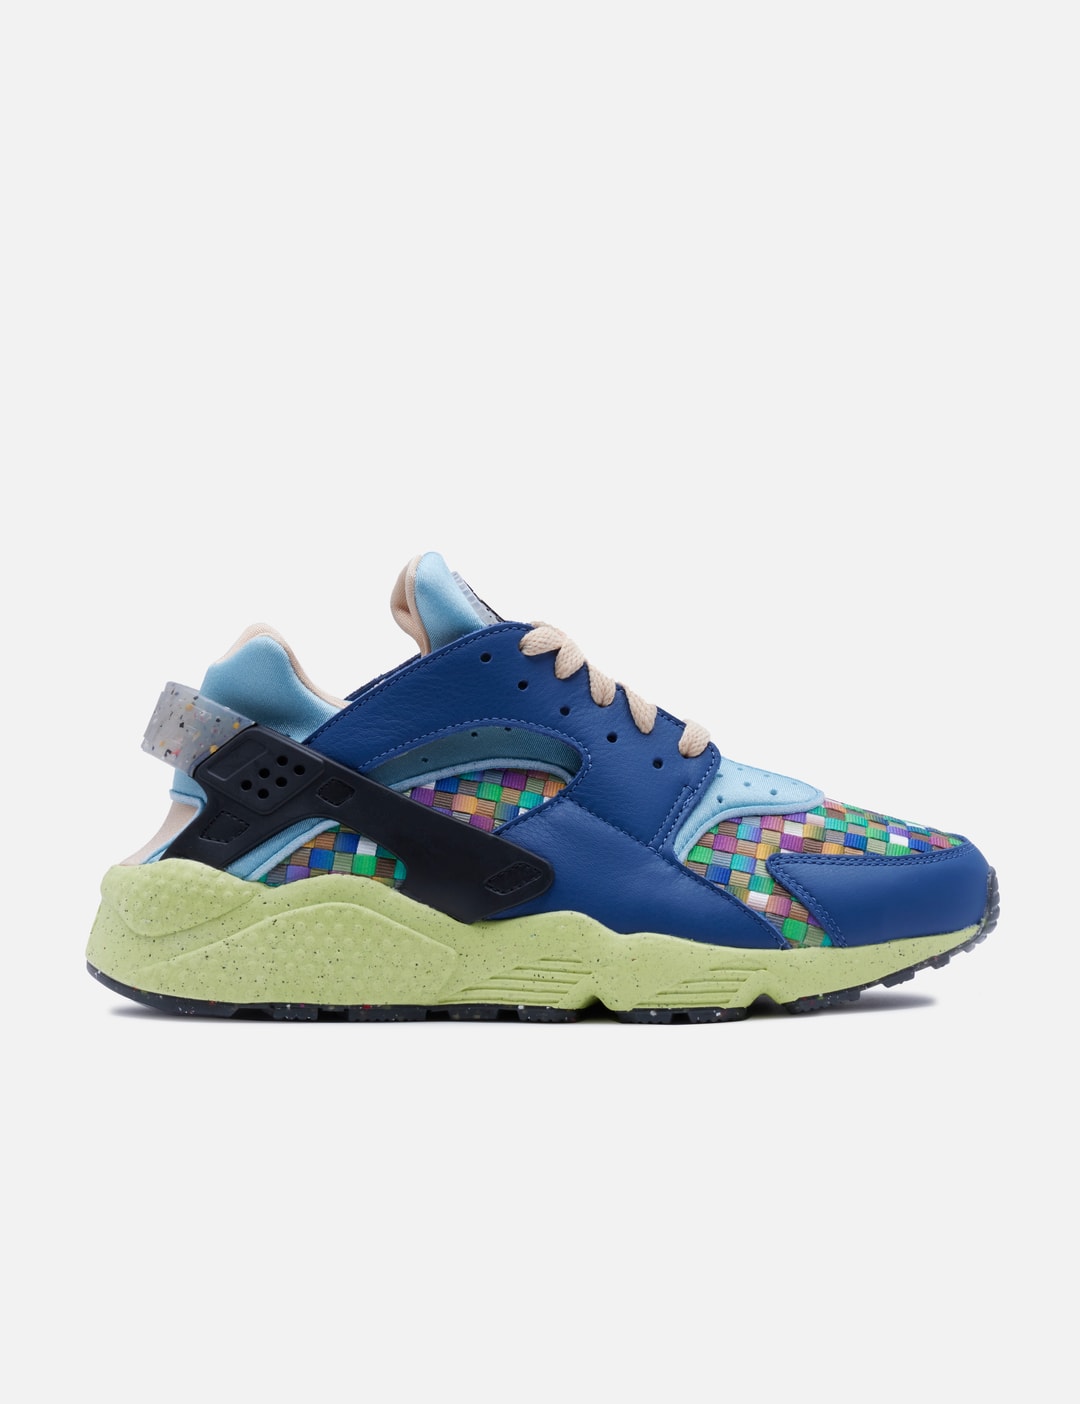 Nike - Nike Huarache Crater Premium | HBX - Globally Curated Fashion and Lifestyle by